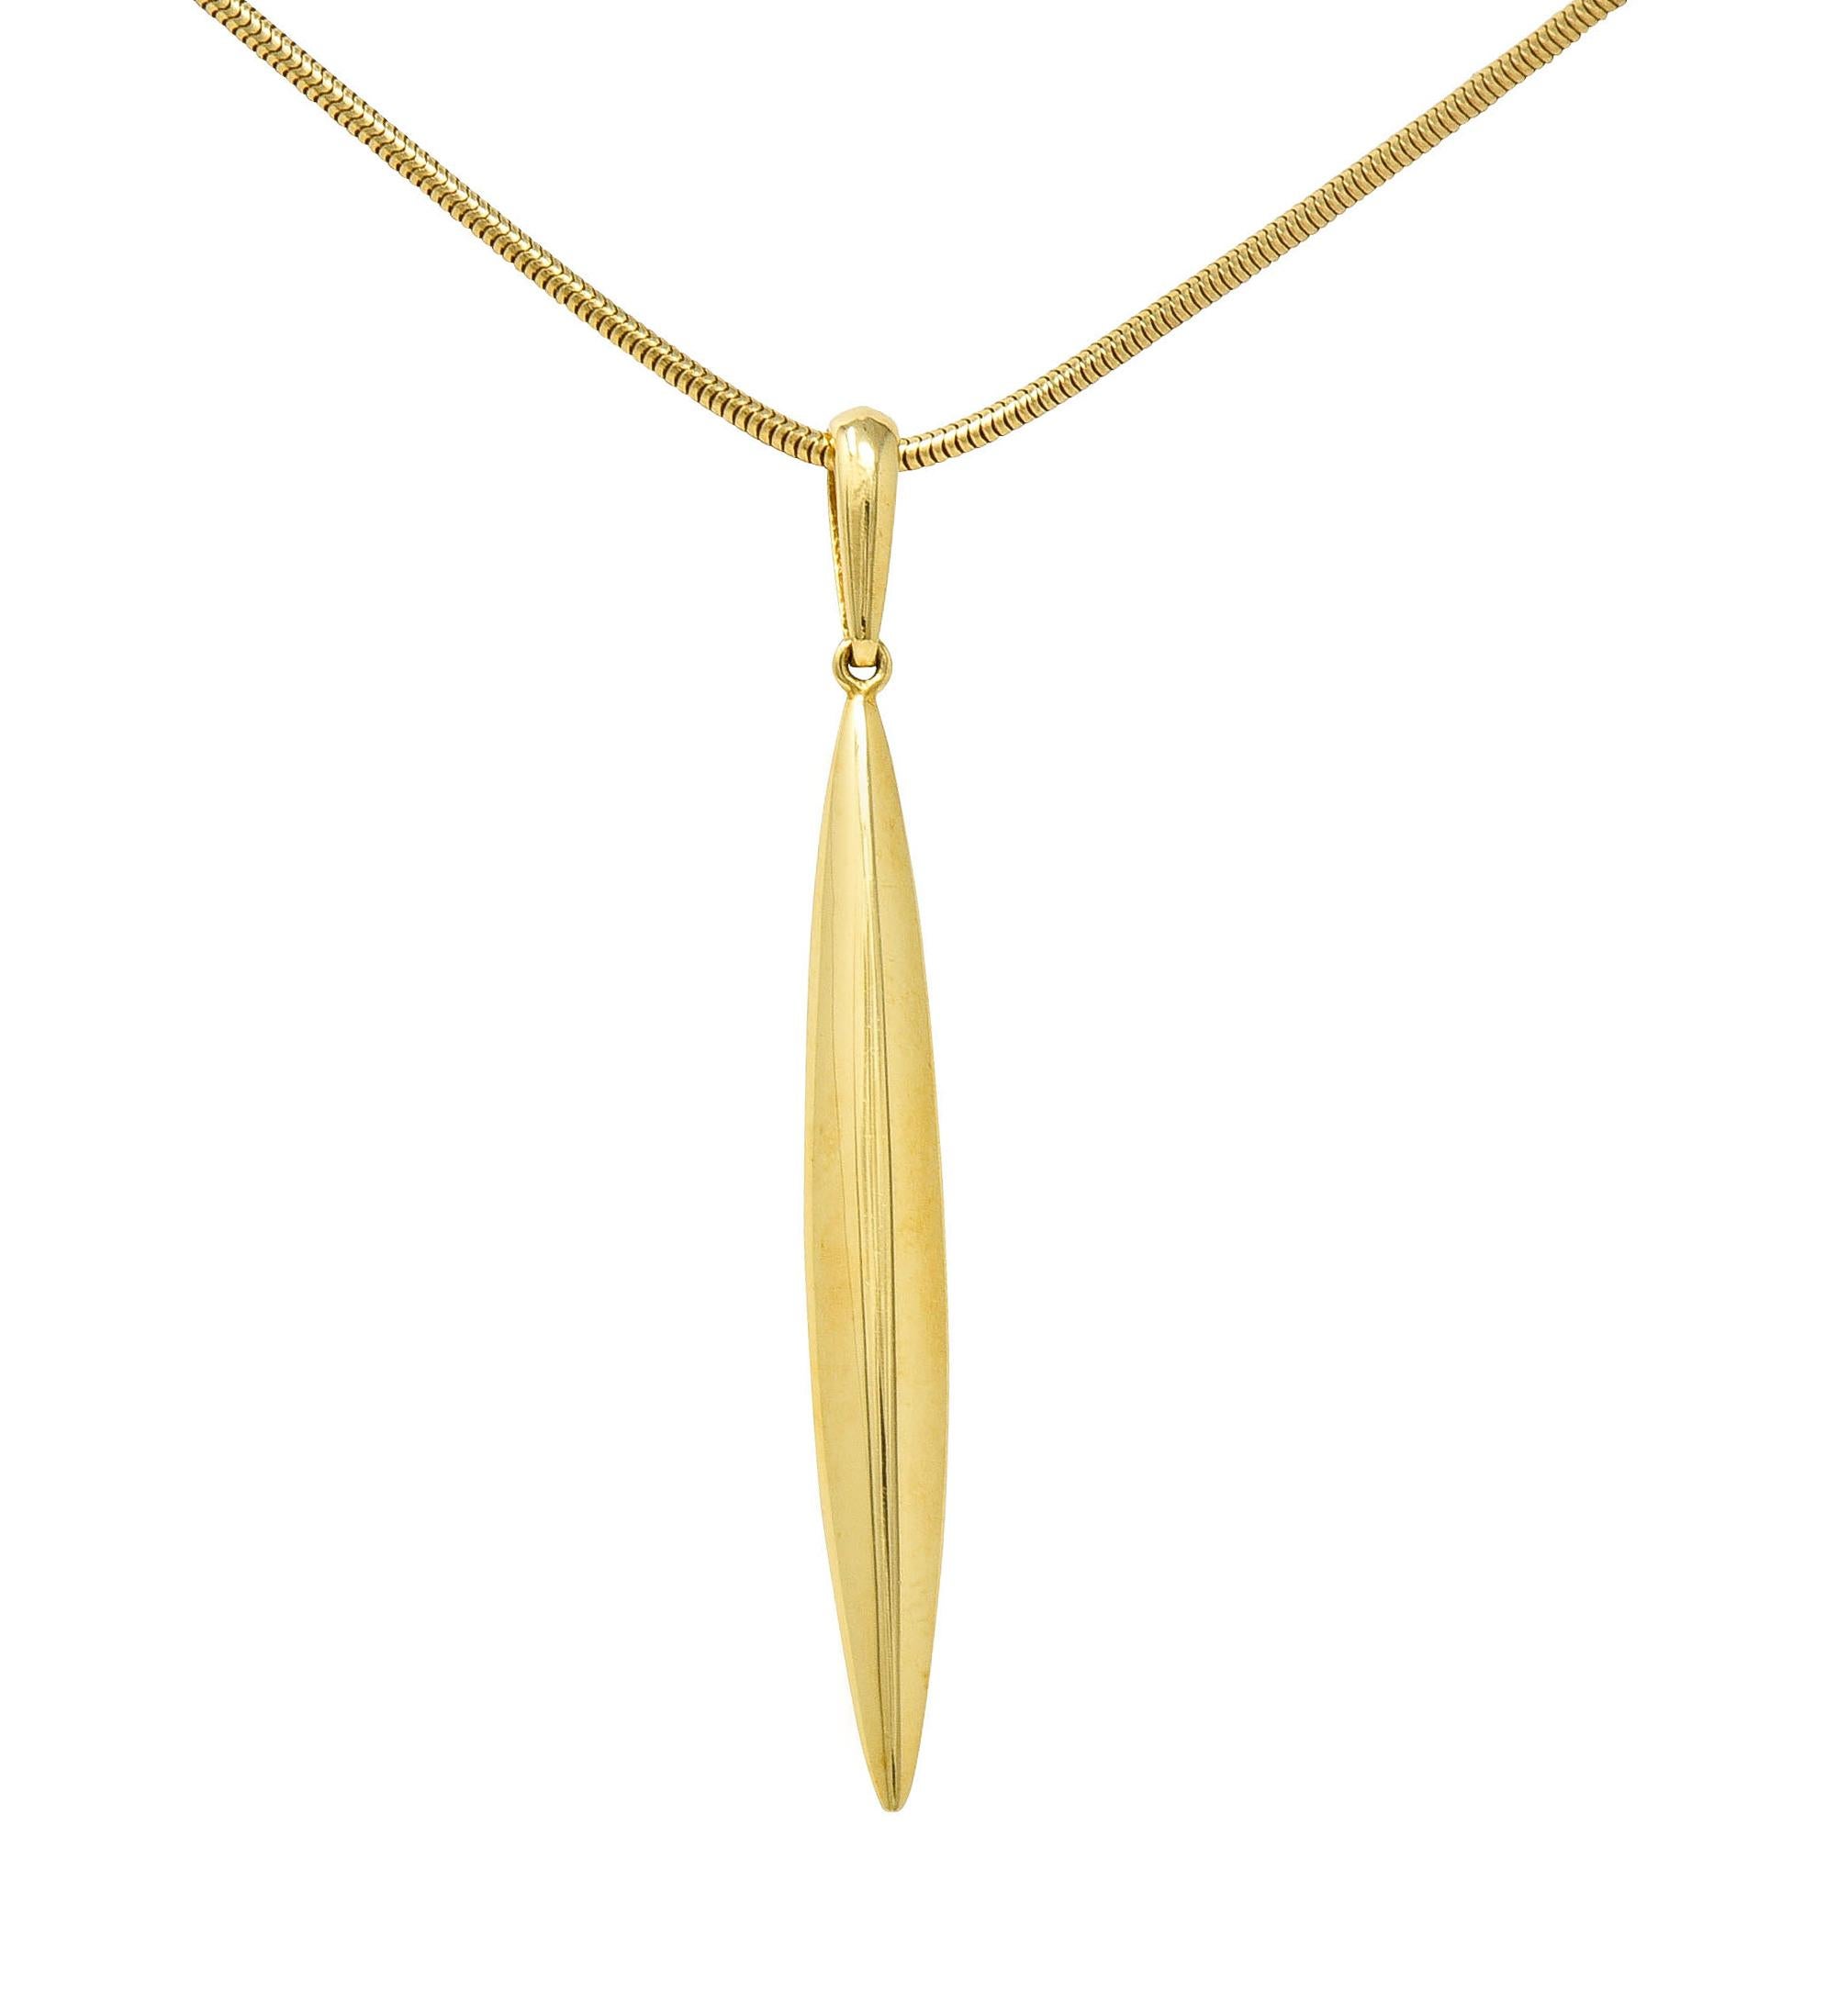 18 karat gold snake chain suspends a streamlined pendant featuring a stylized feather

Chain is lightweight and springy while pendant is brightly polished

Completed by logo link and lobster clasp

Both chain and pendant are stamped 750 for 18 karat